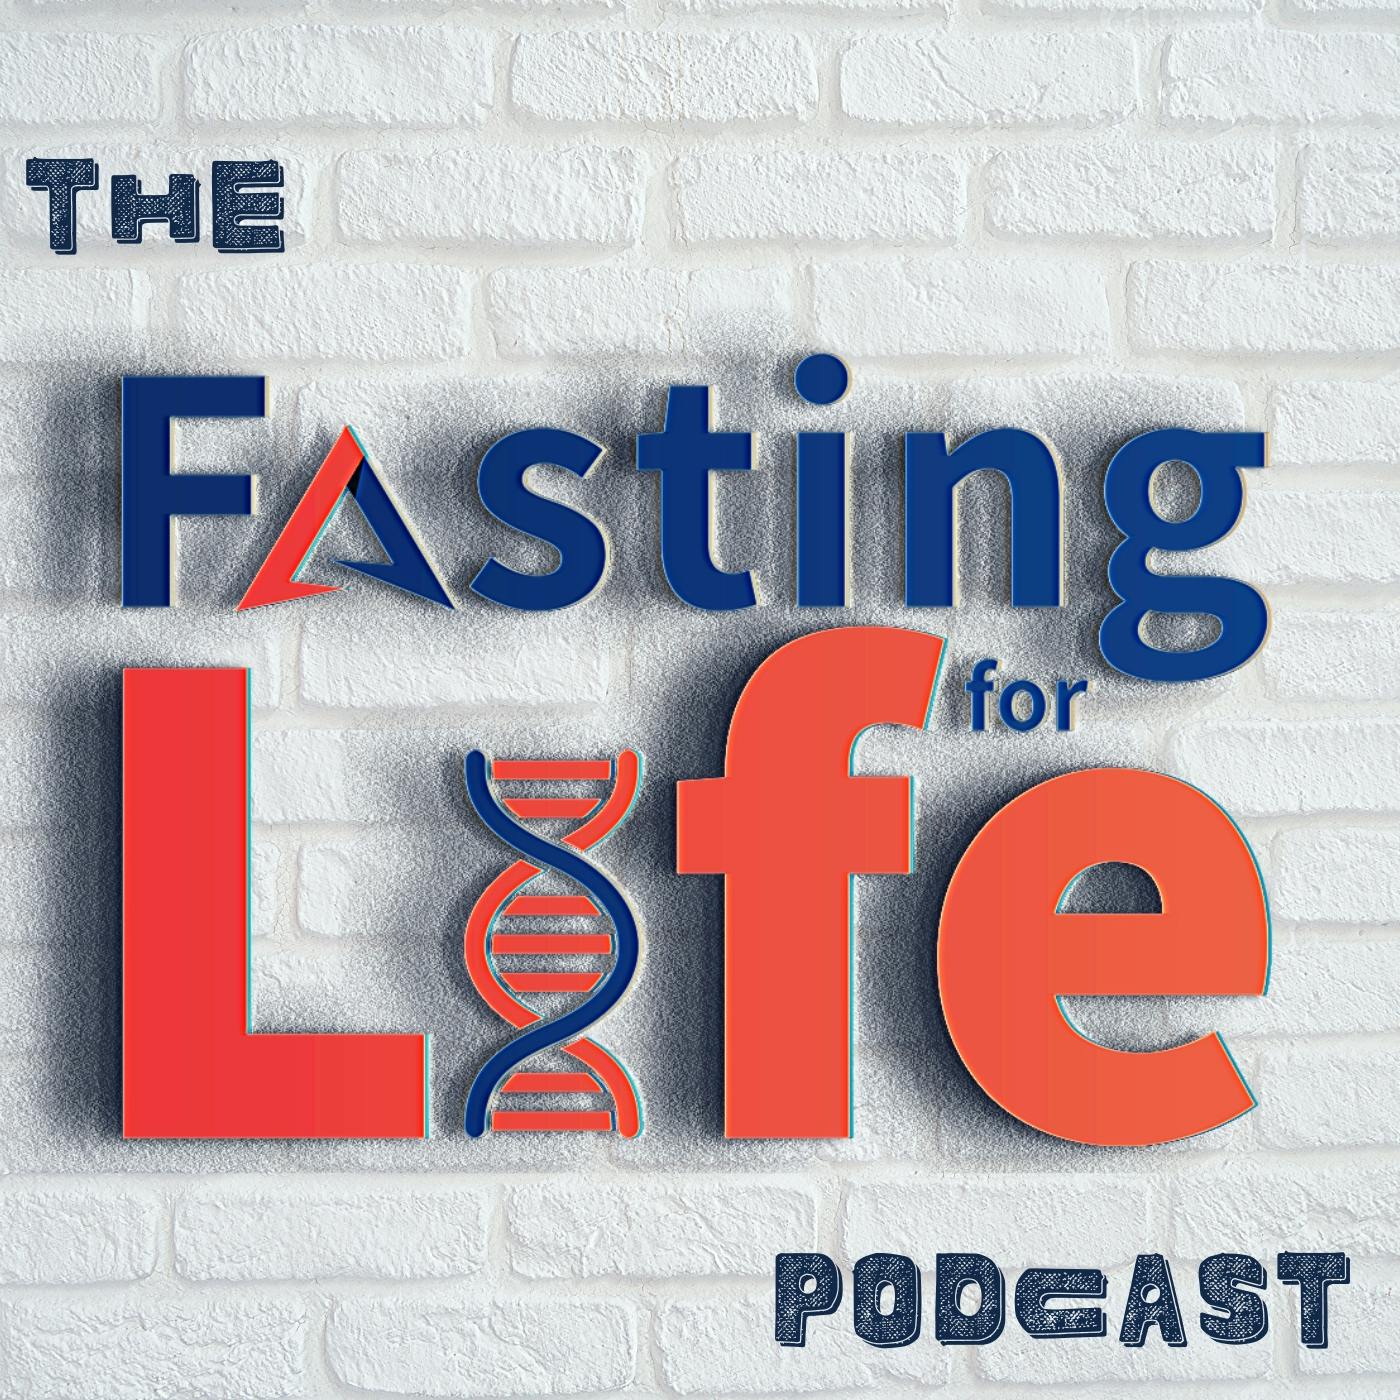 Ep. 107 - Listener Q&A | Isn’t fasting just calorie restriction? | How much should I eat? | Help! I can’t stop eating once I start! | How do I get my spouse on board? | I get cramps when I fast...what